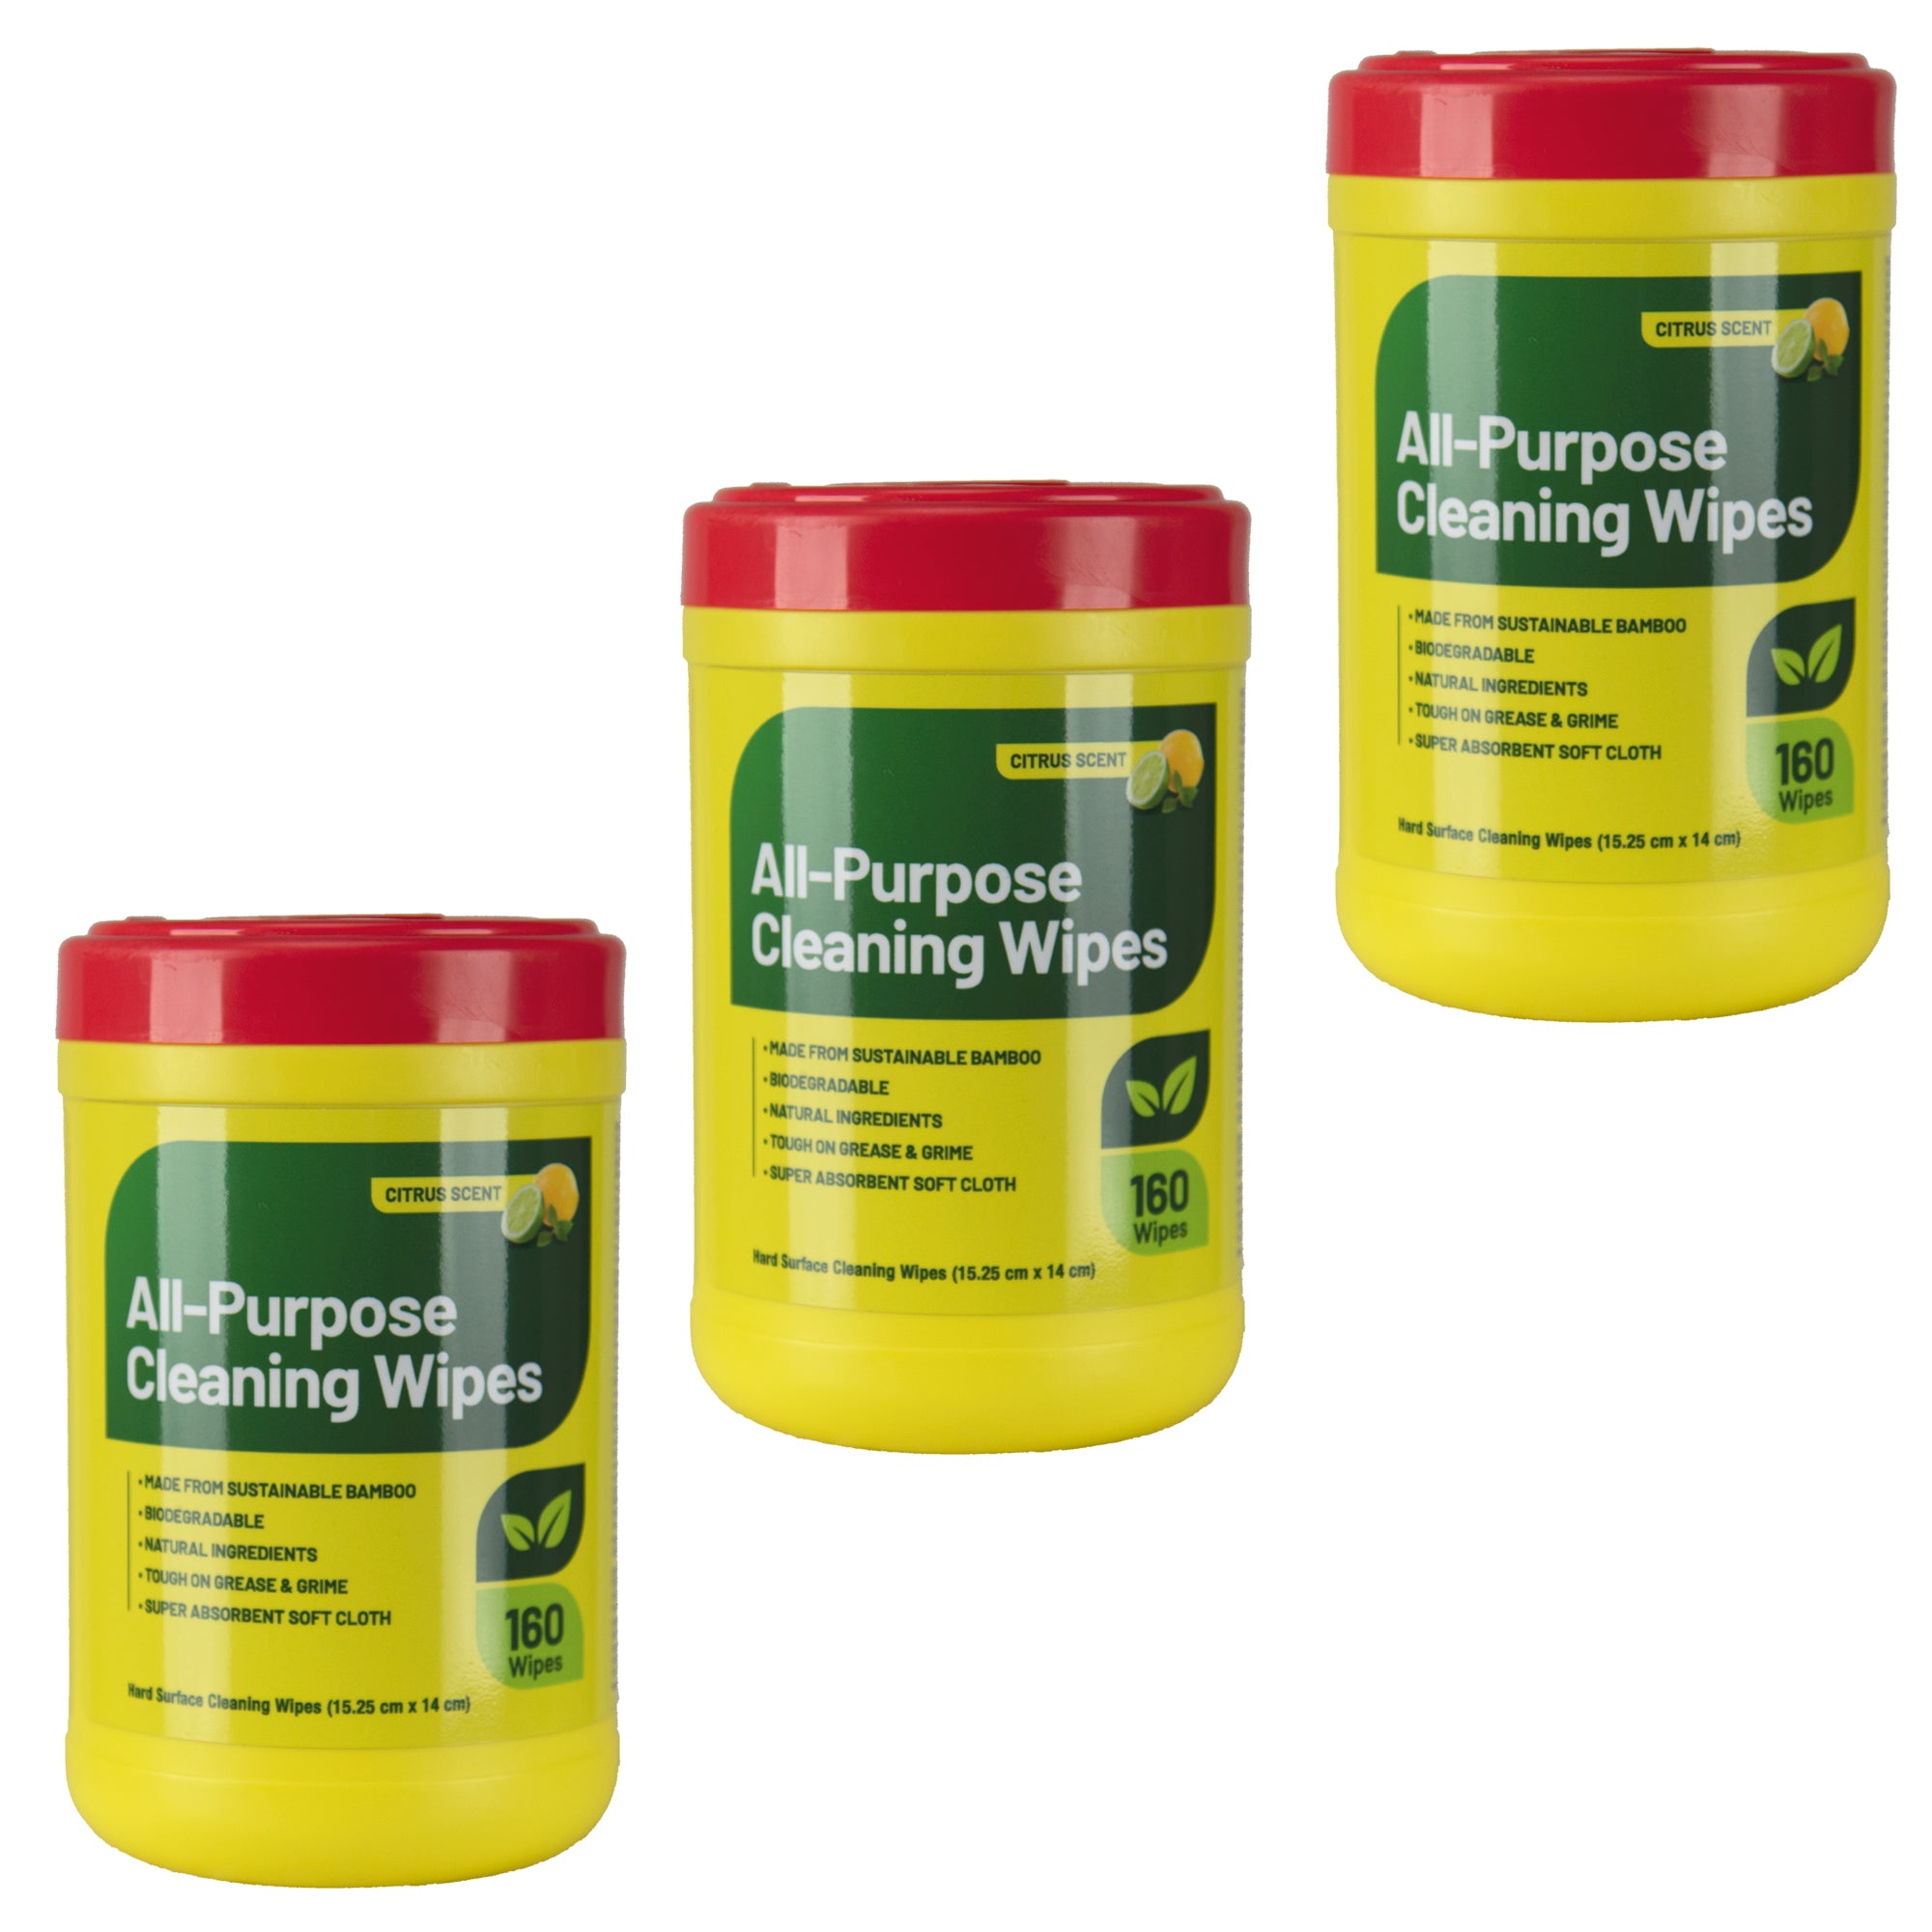 3 canister of All-Purpose Cleaning Wipes, 160 wipes per canister on a white background